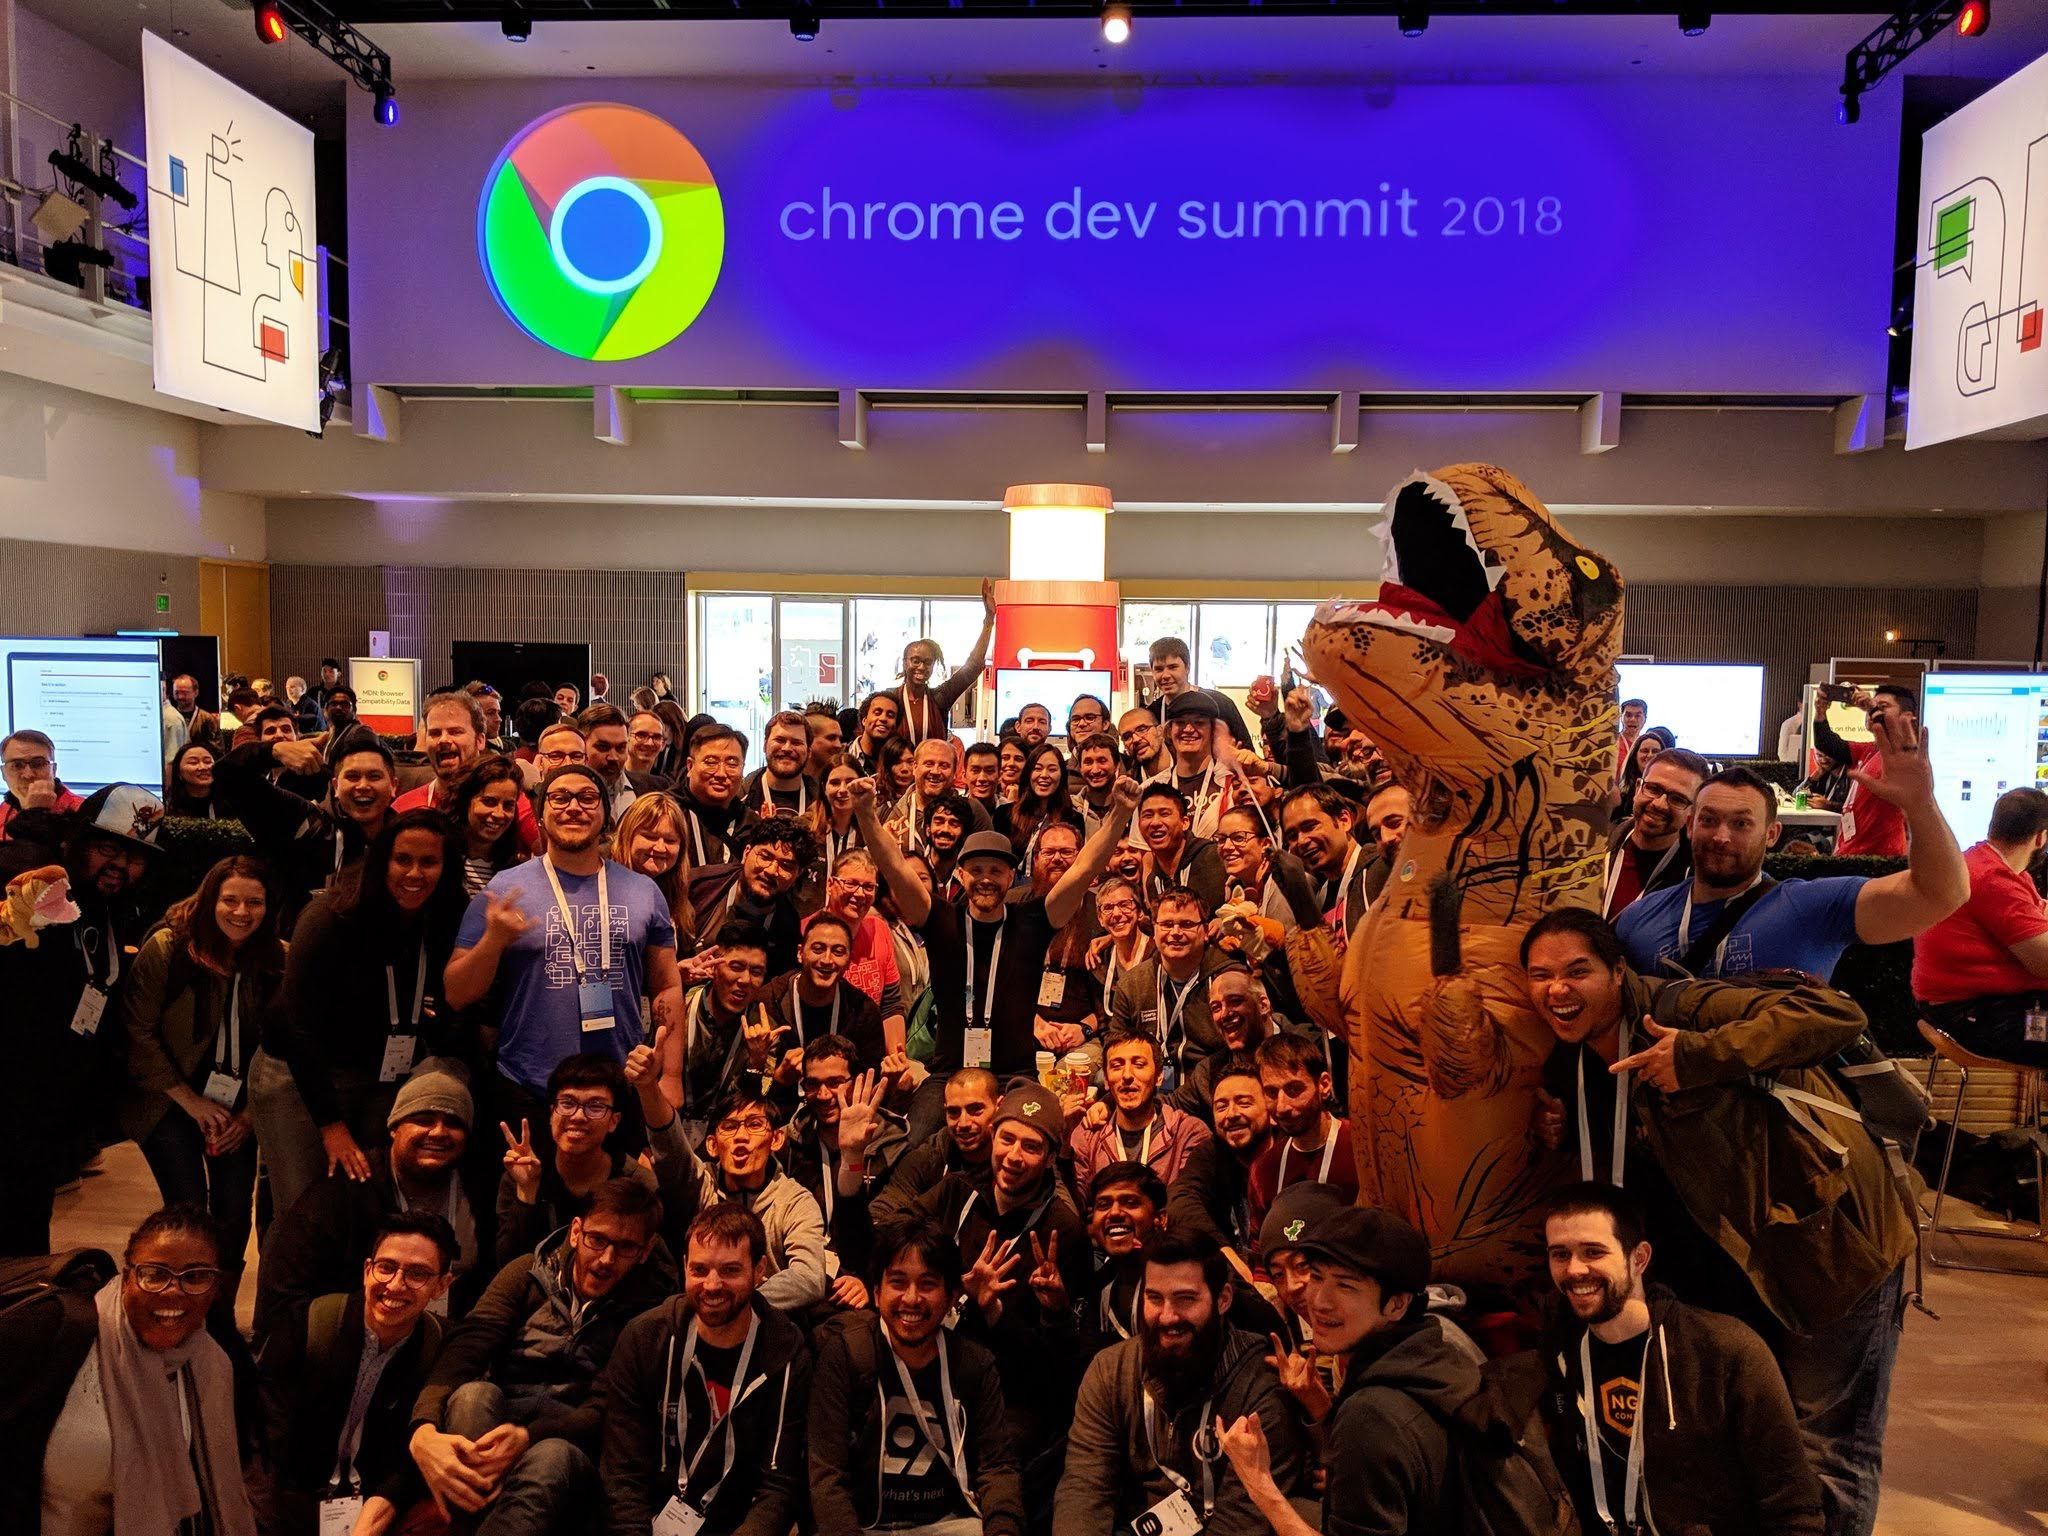 Group photo of attendees at Chrome Dev Summit with a person in a dinosaur costume